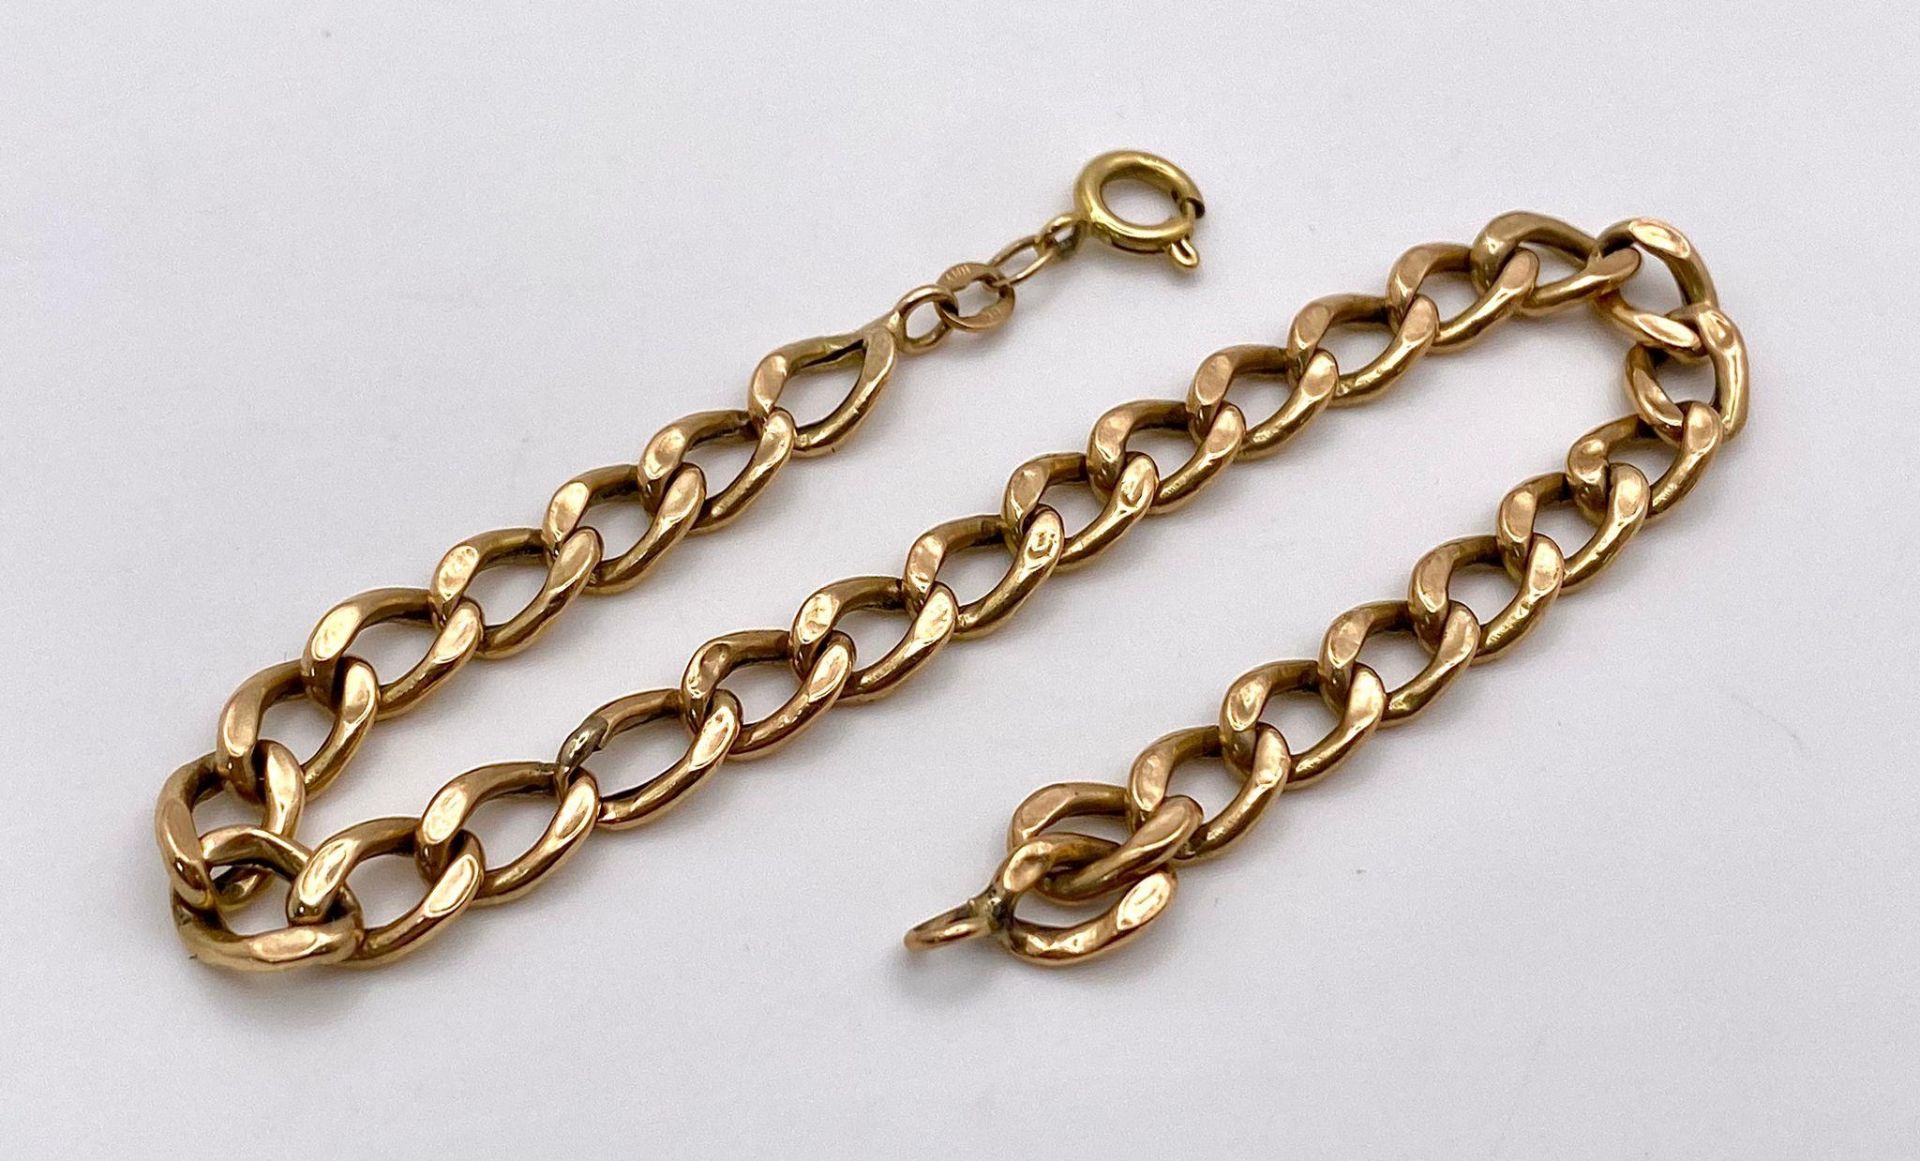 An 18K Yellow Gold Flat Curb Link Bracelet. 19cm. 4.25g weight. - Image 2 of 6